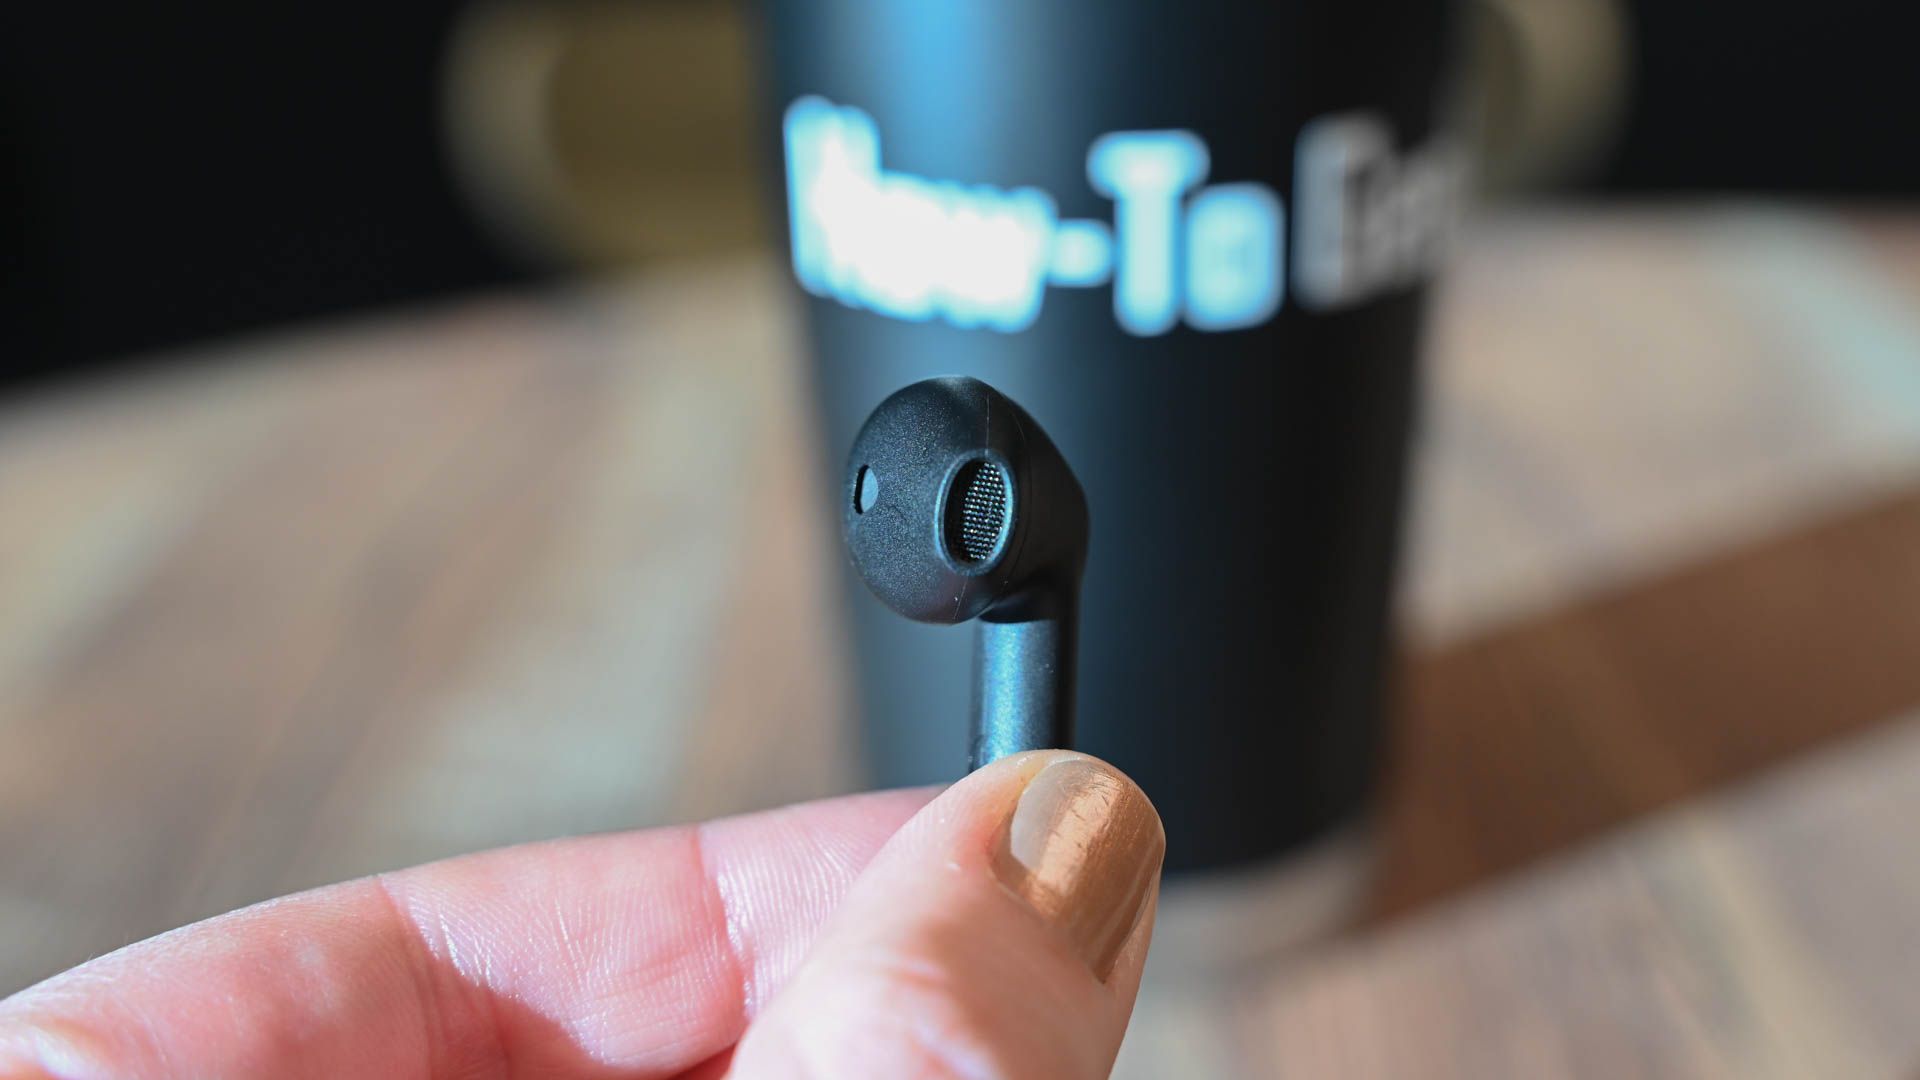 soundpeats wireless earbuds air3 deluxe hs review